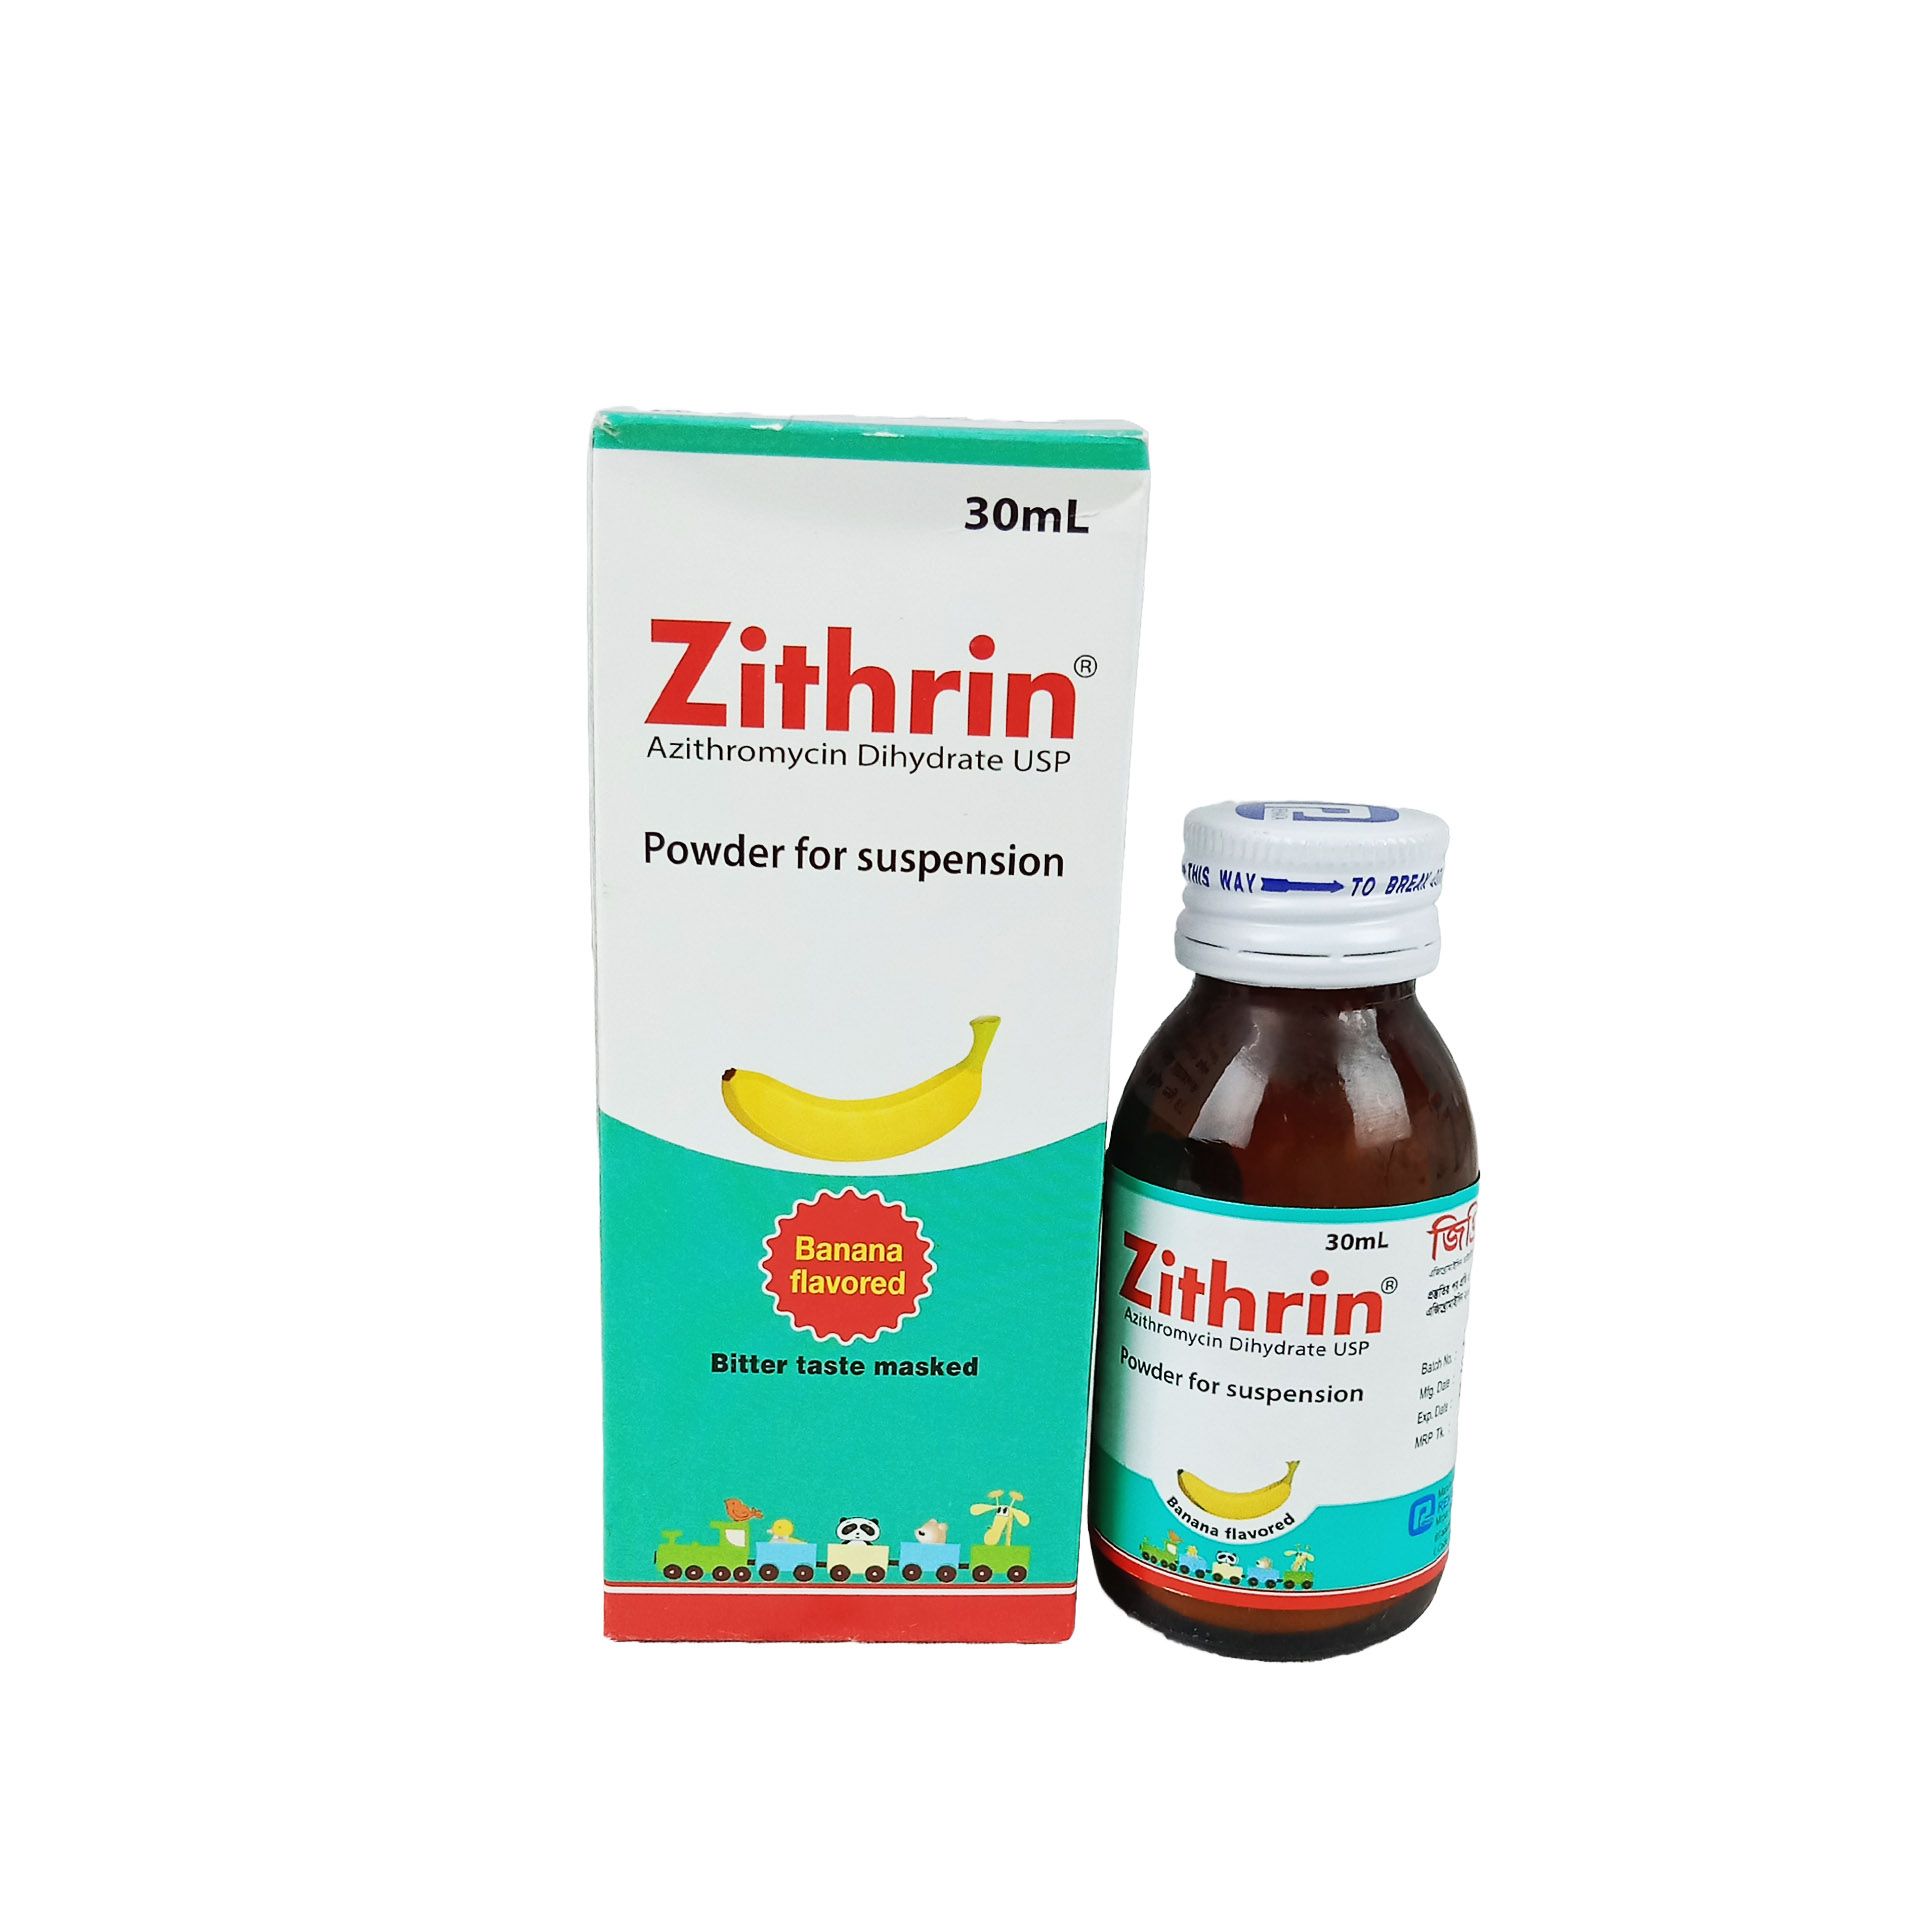 Zithrin 200mg/5ml Powder for Suspension